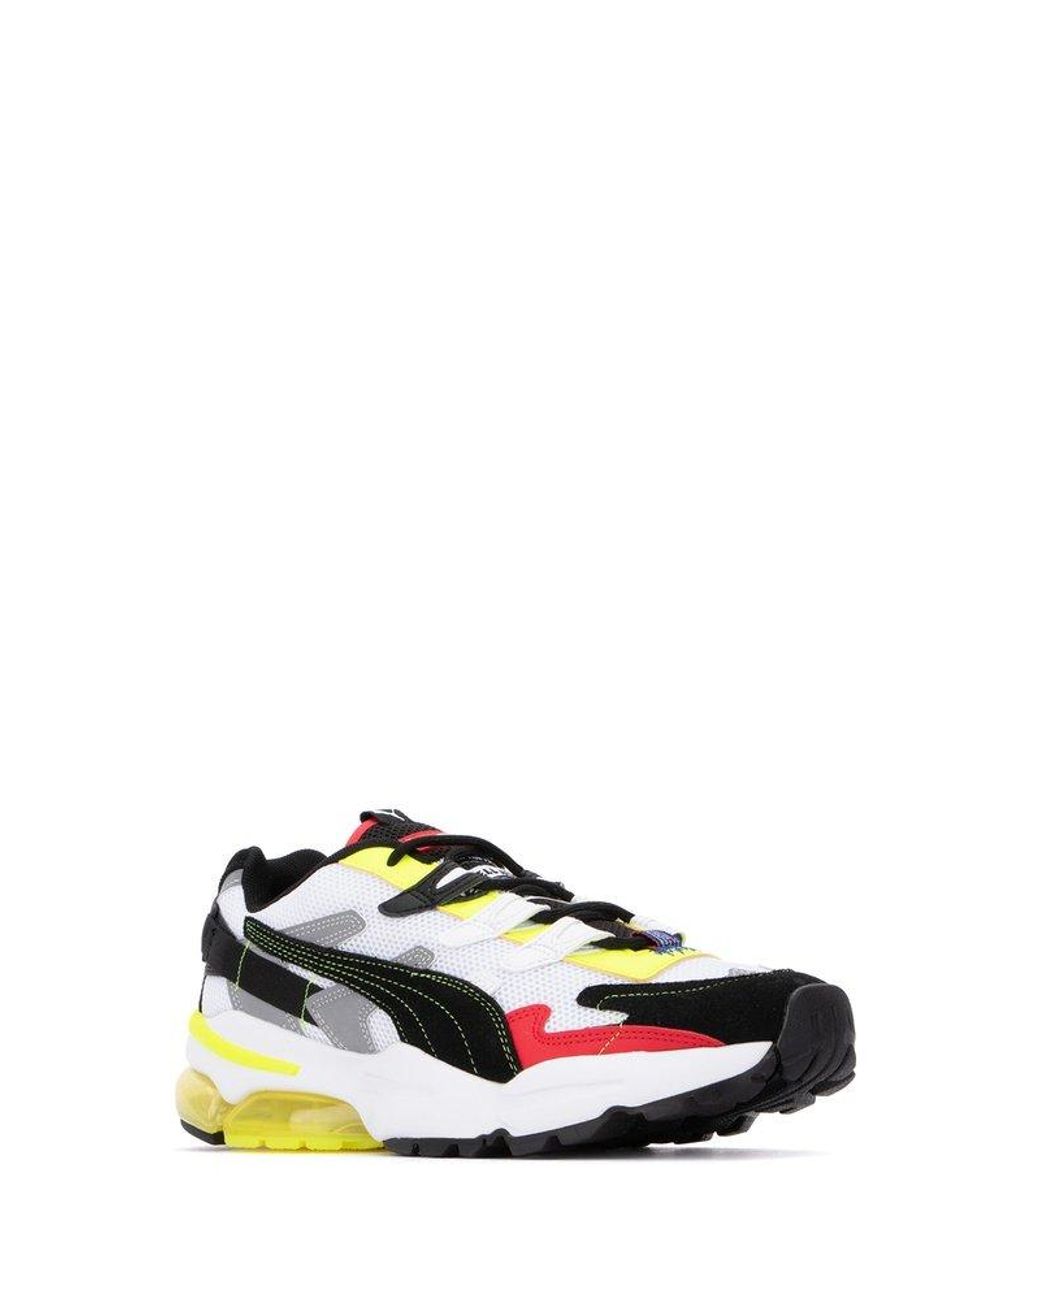 PUMA Synthetic X Ader Error Cell Alien Sneakers for Men - Save 84 